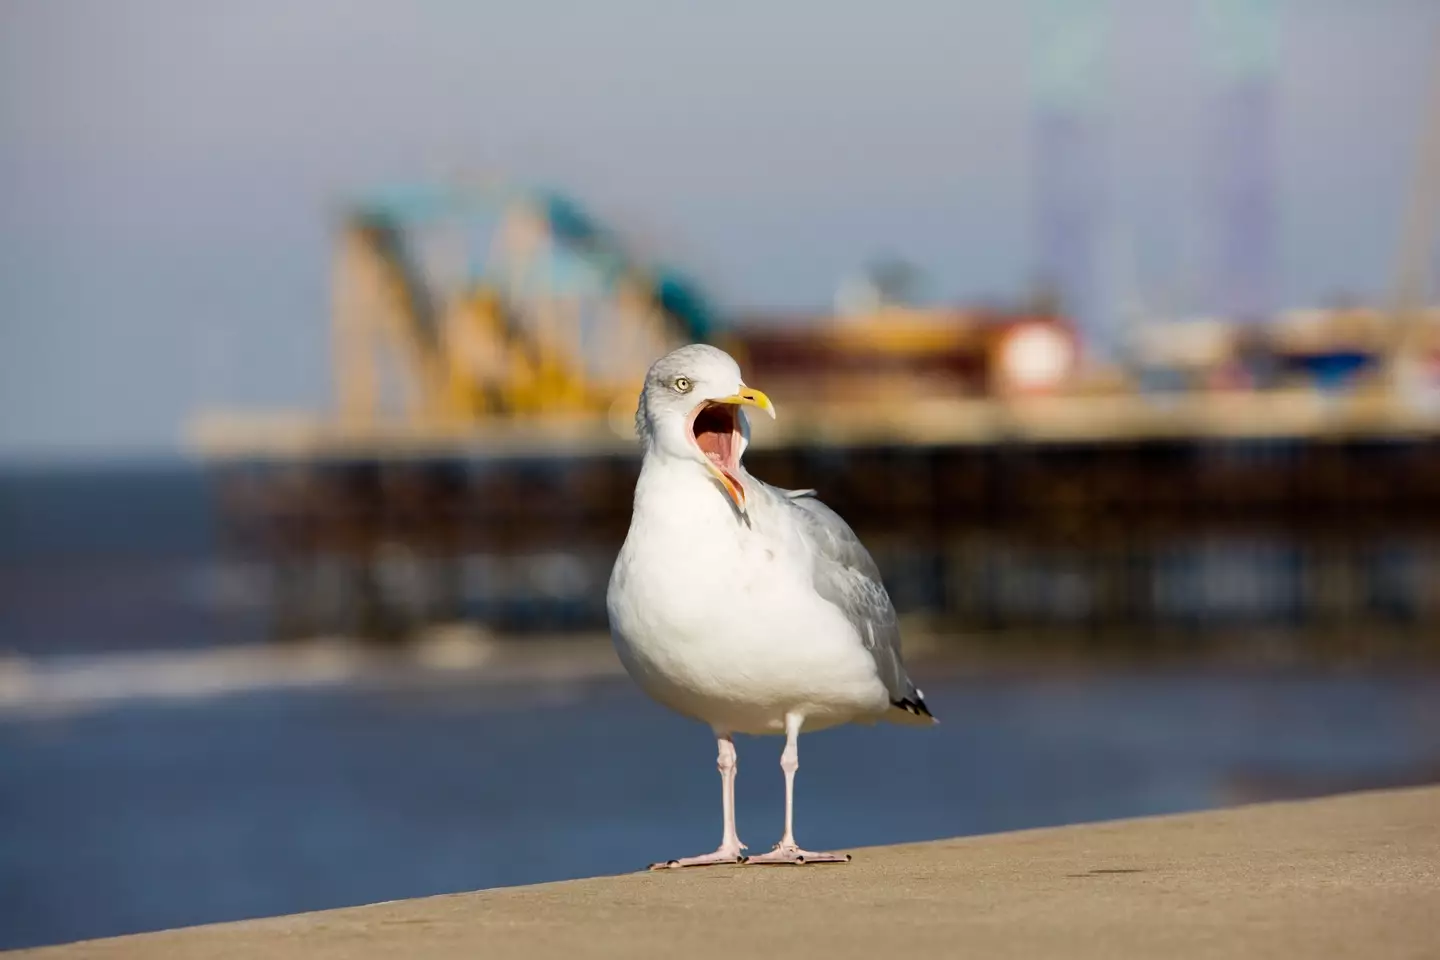 A seagull on chip lookout in Blackpool.